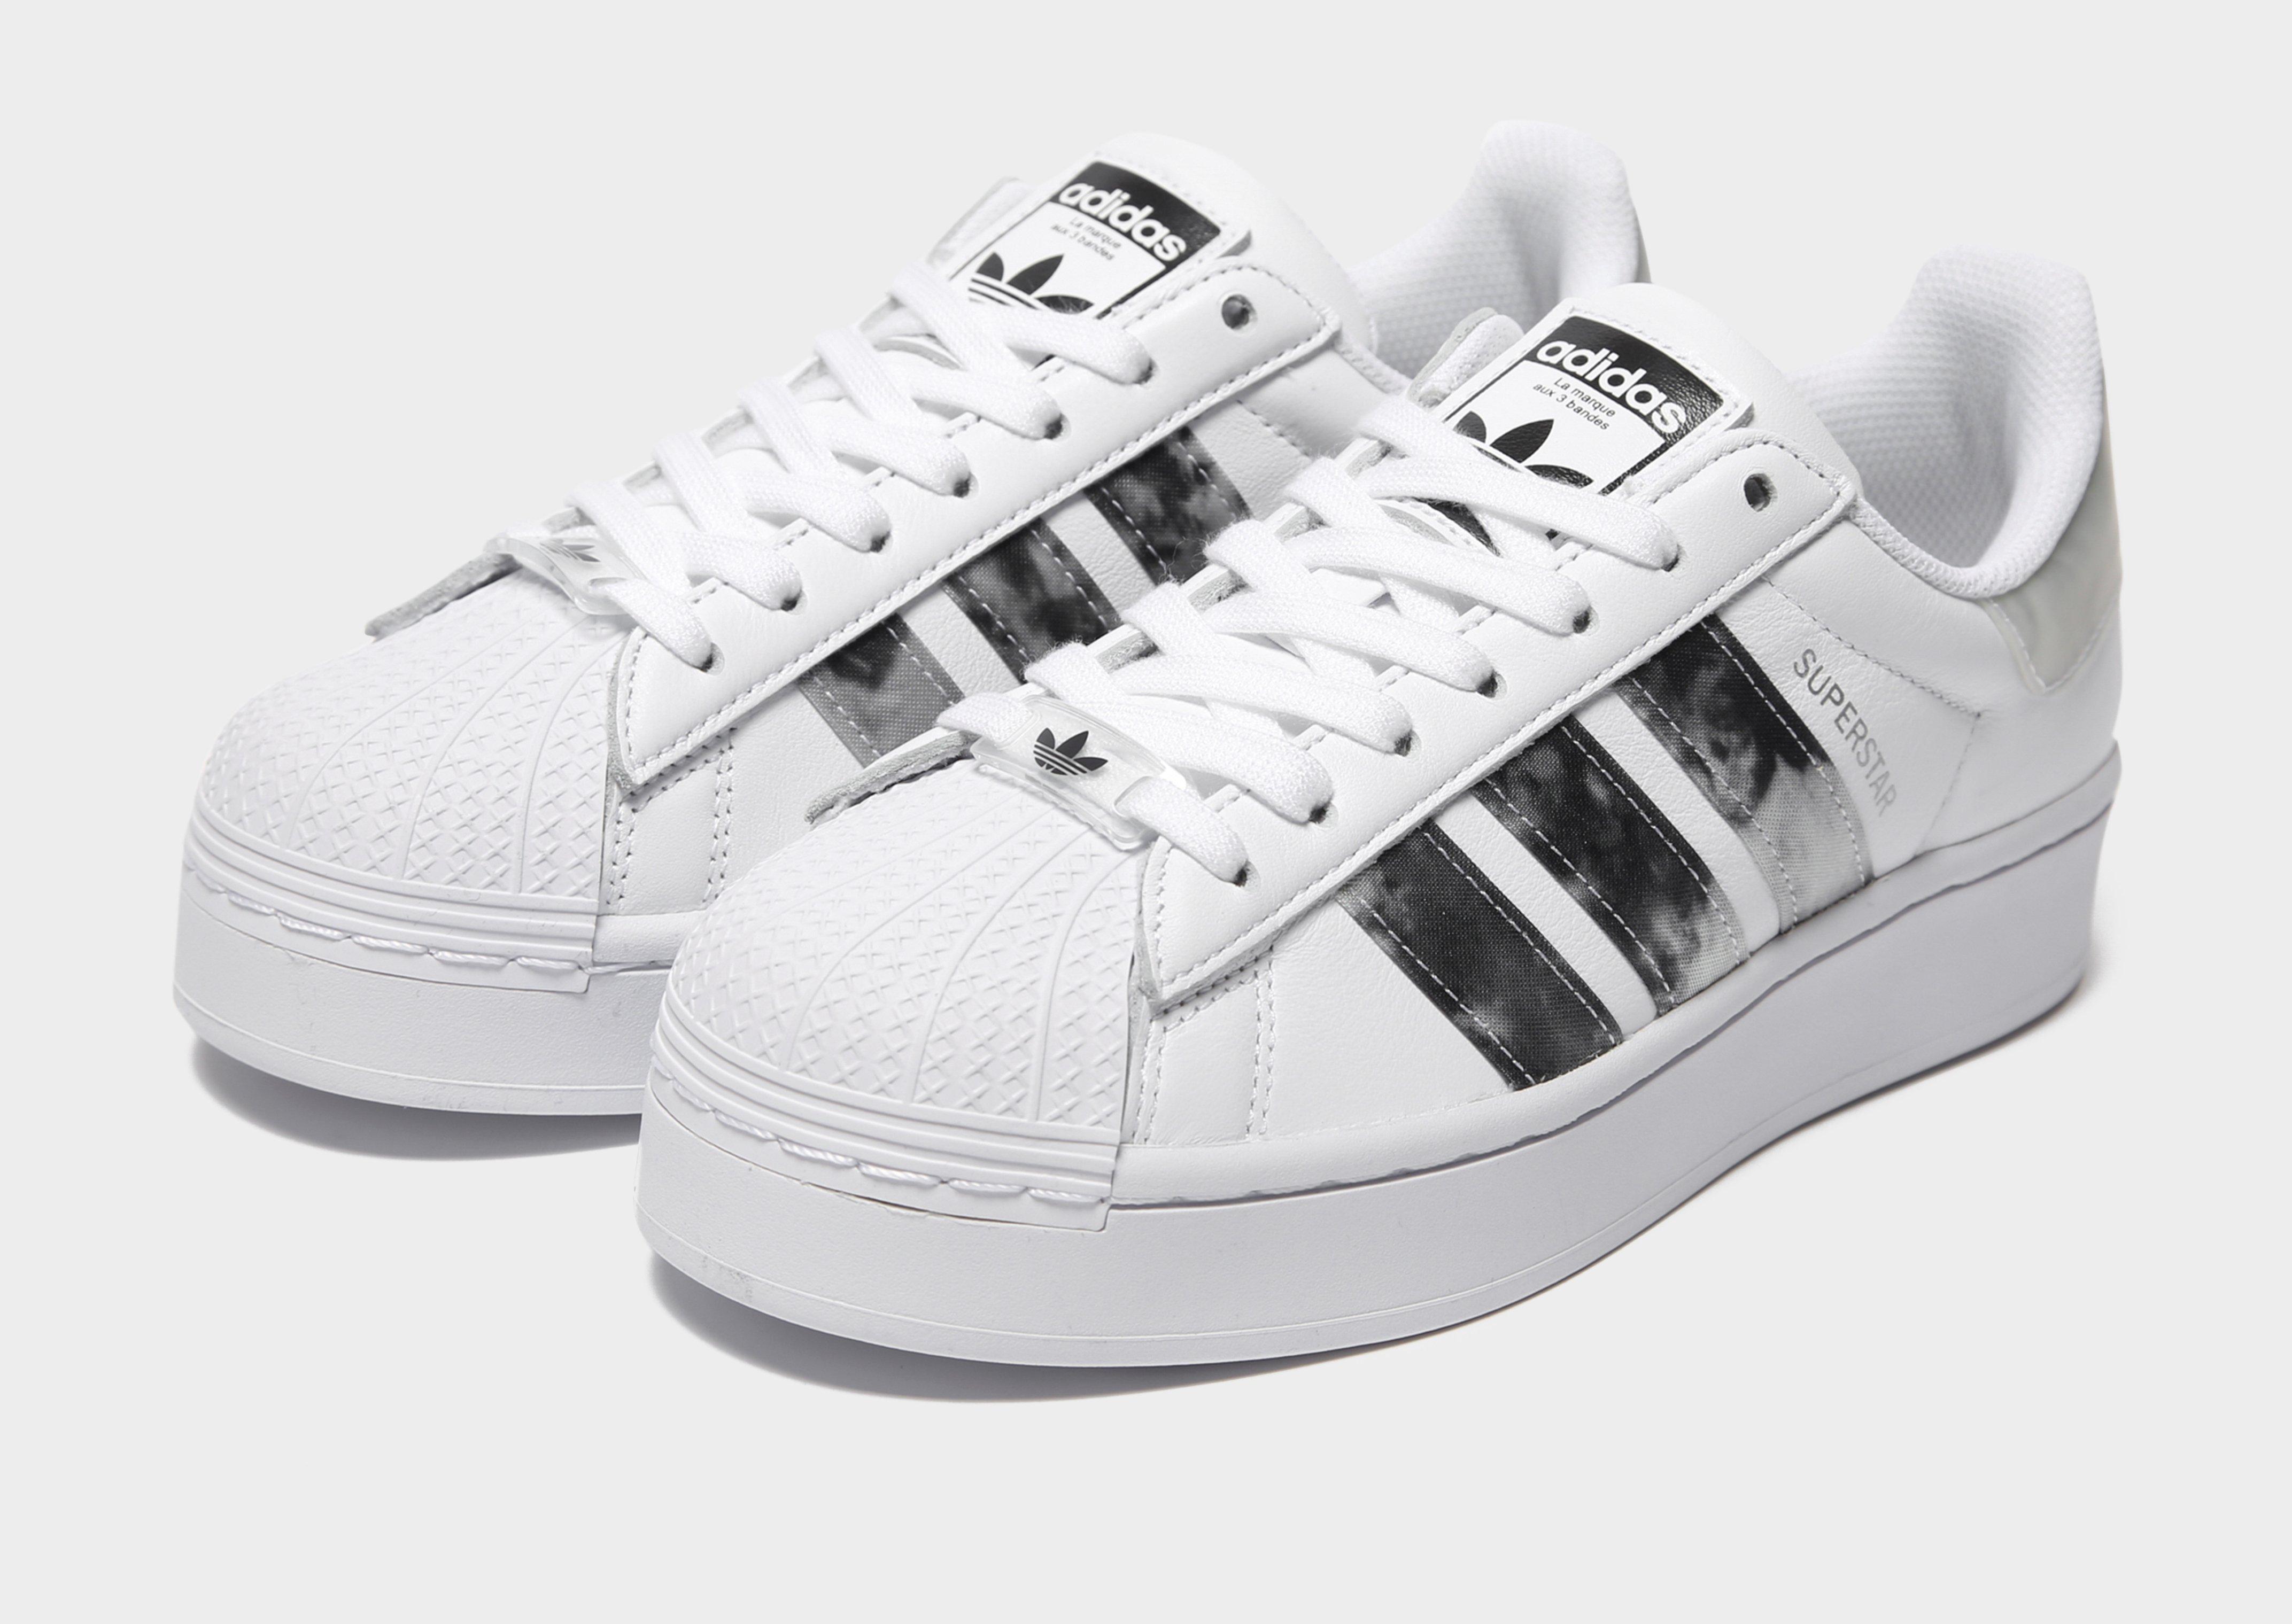 adidas originals superstar bold leather sneakers